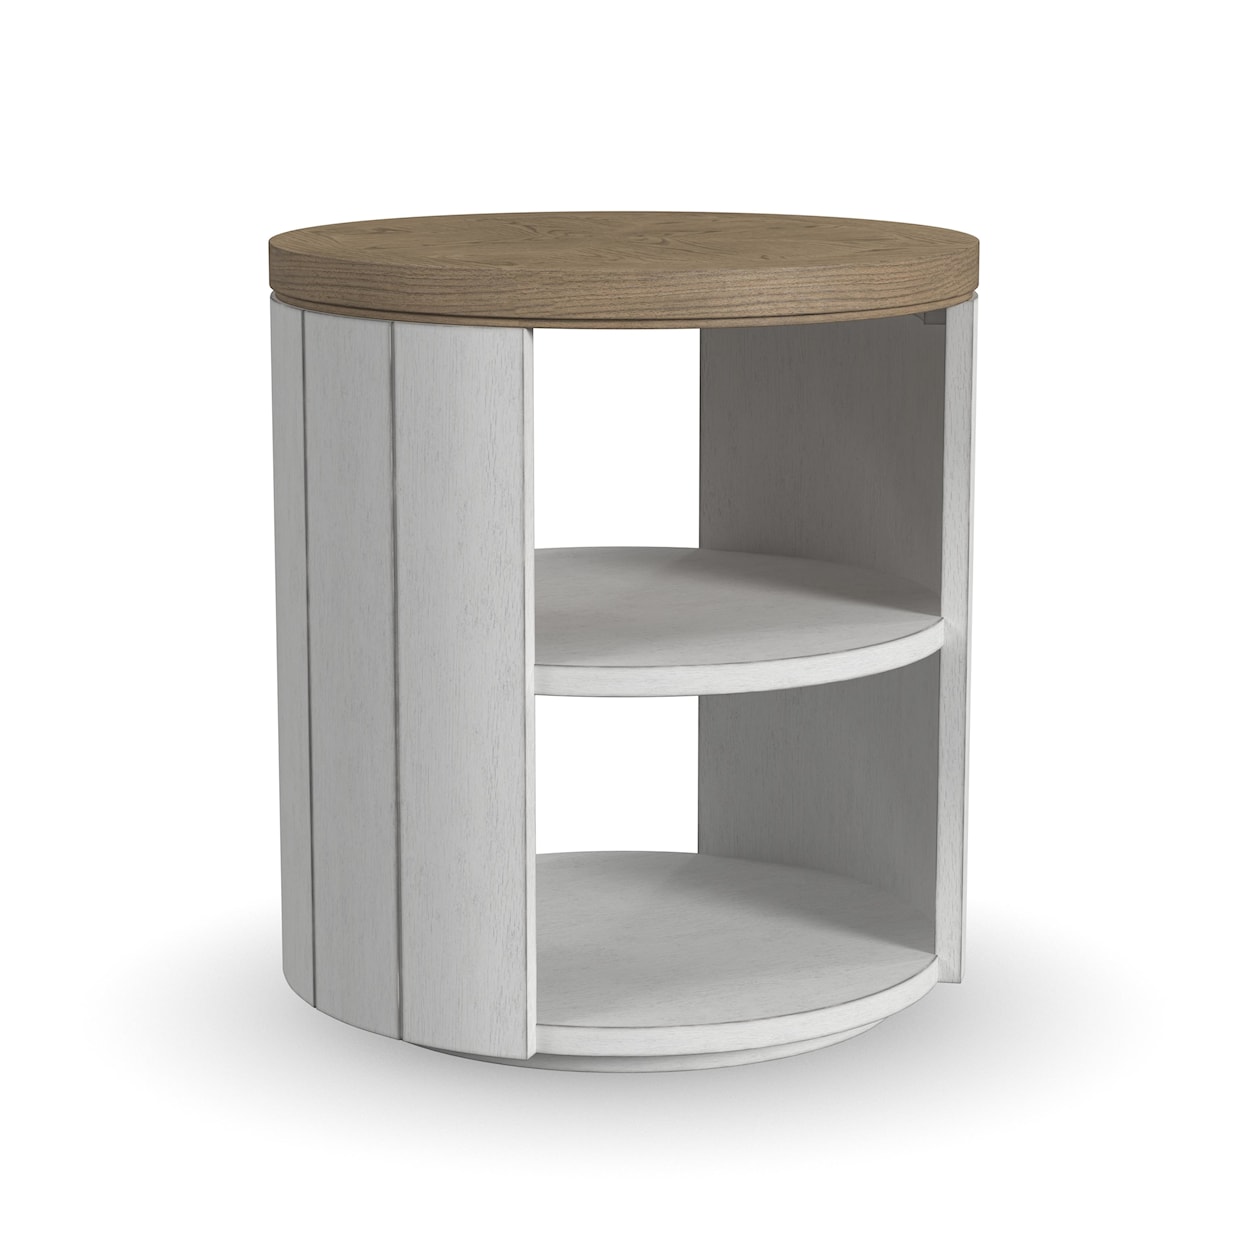 Flexsteel Casegoods Melody Round End Table